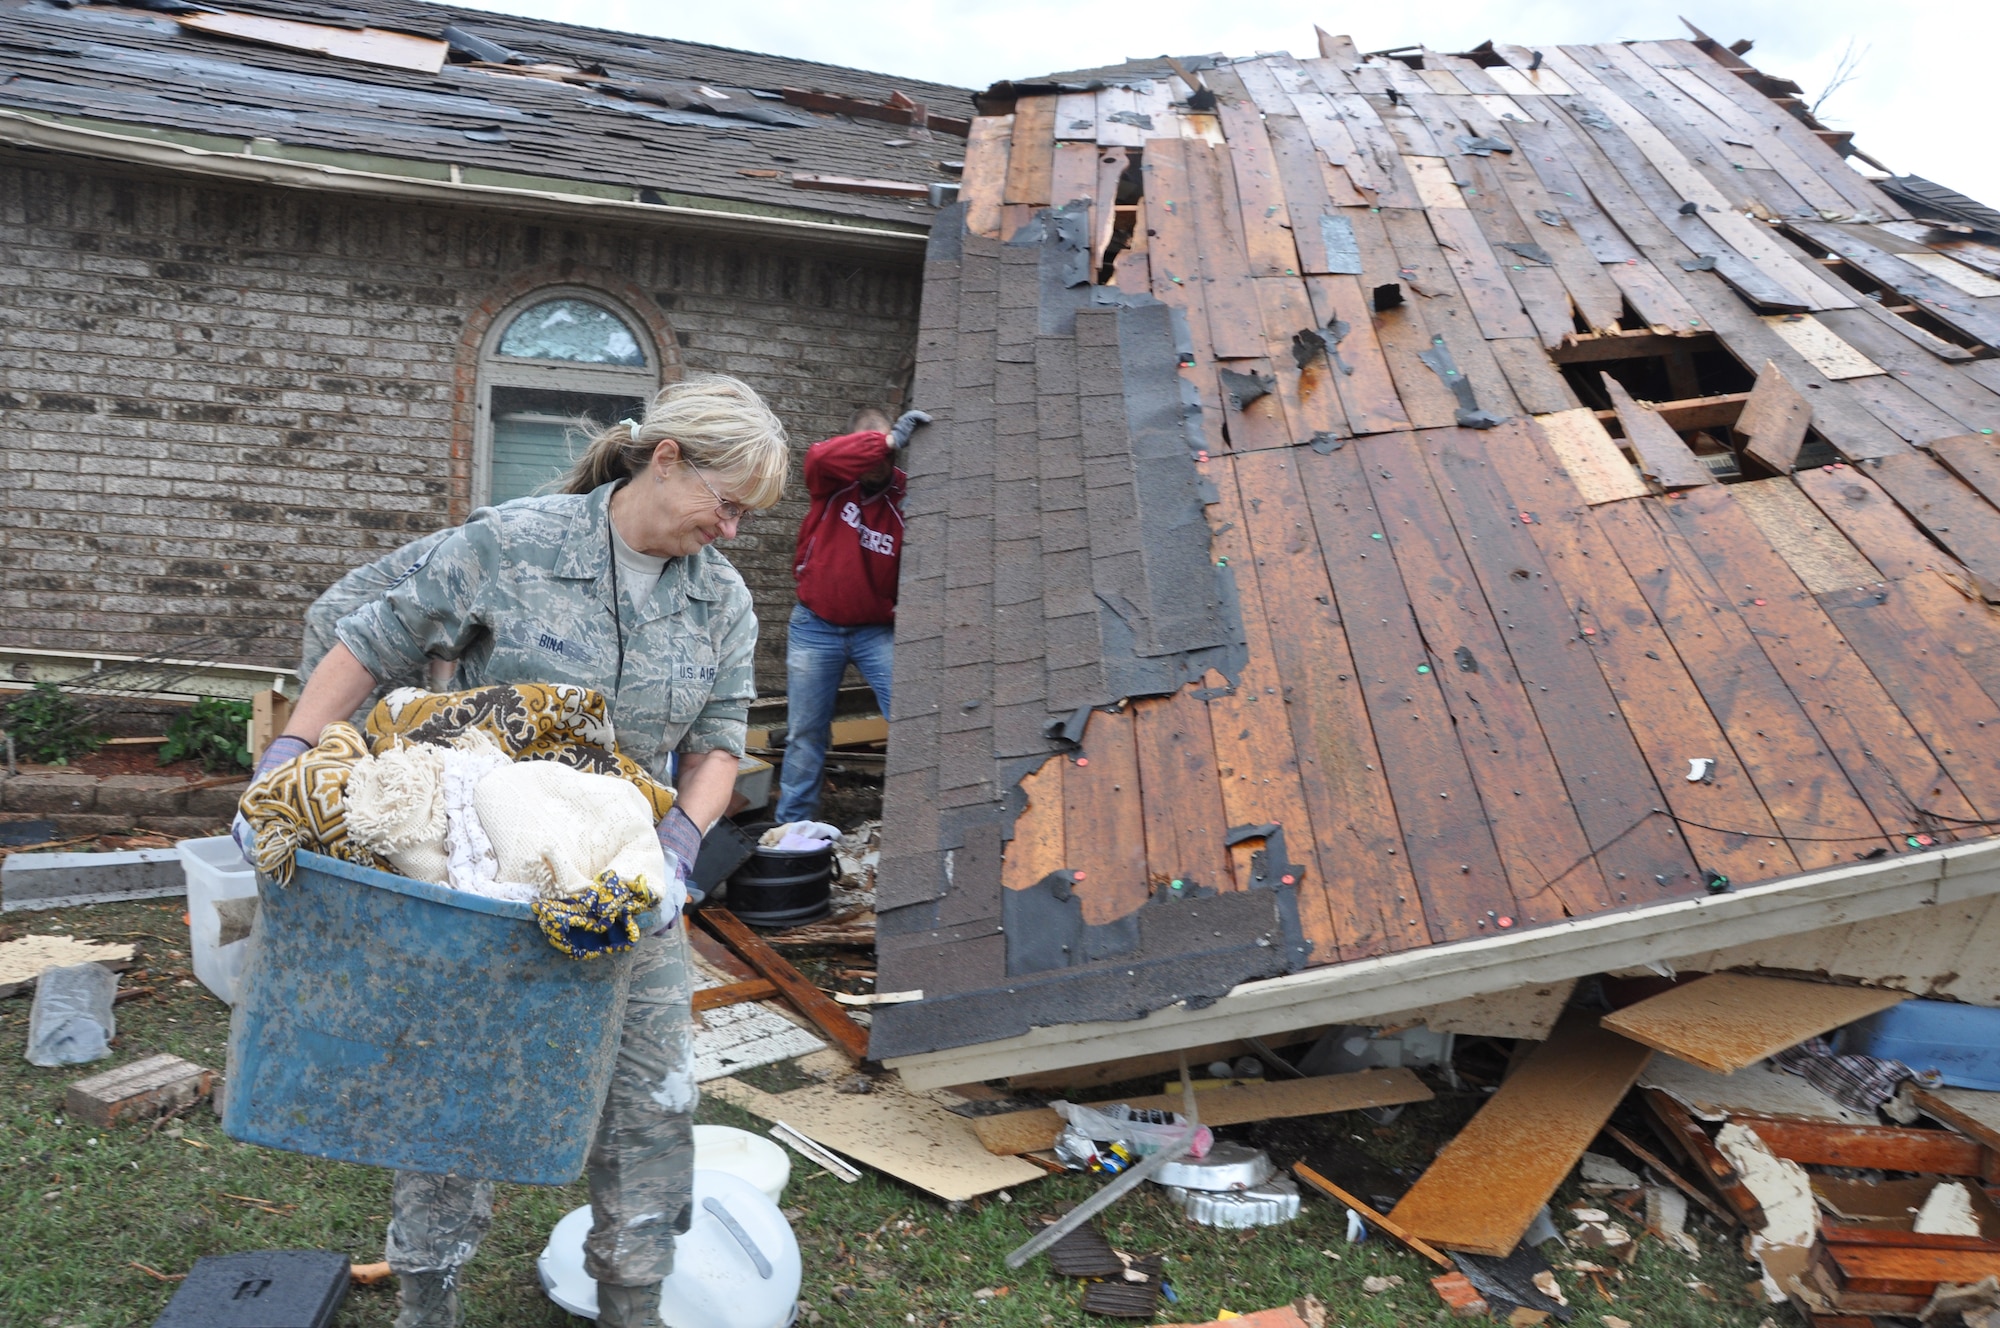 Air Force Master Sgt. Cherry Bina, Oklahoma Air National Guard, 137th Maintenance Group, recovers personal items from her own house in Moore, Okla., May 21, 2013. Her house was severely damaged after a devastating tornado killed dozens of people in Moore, Okla., May 20, 2013. (U.S. Air Force photo by Maj. Jon Quinlan)